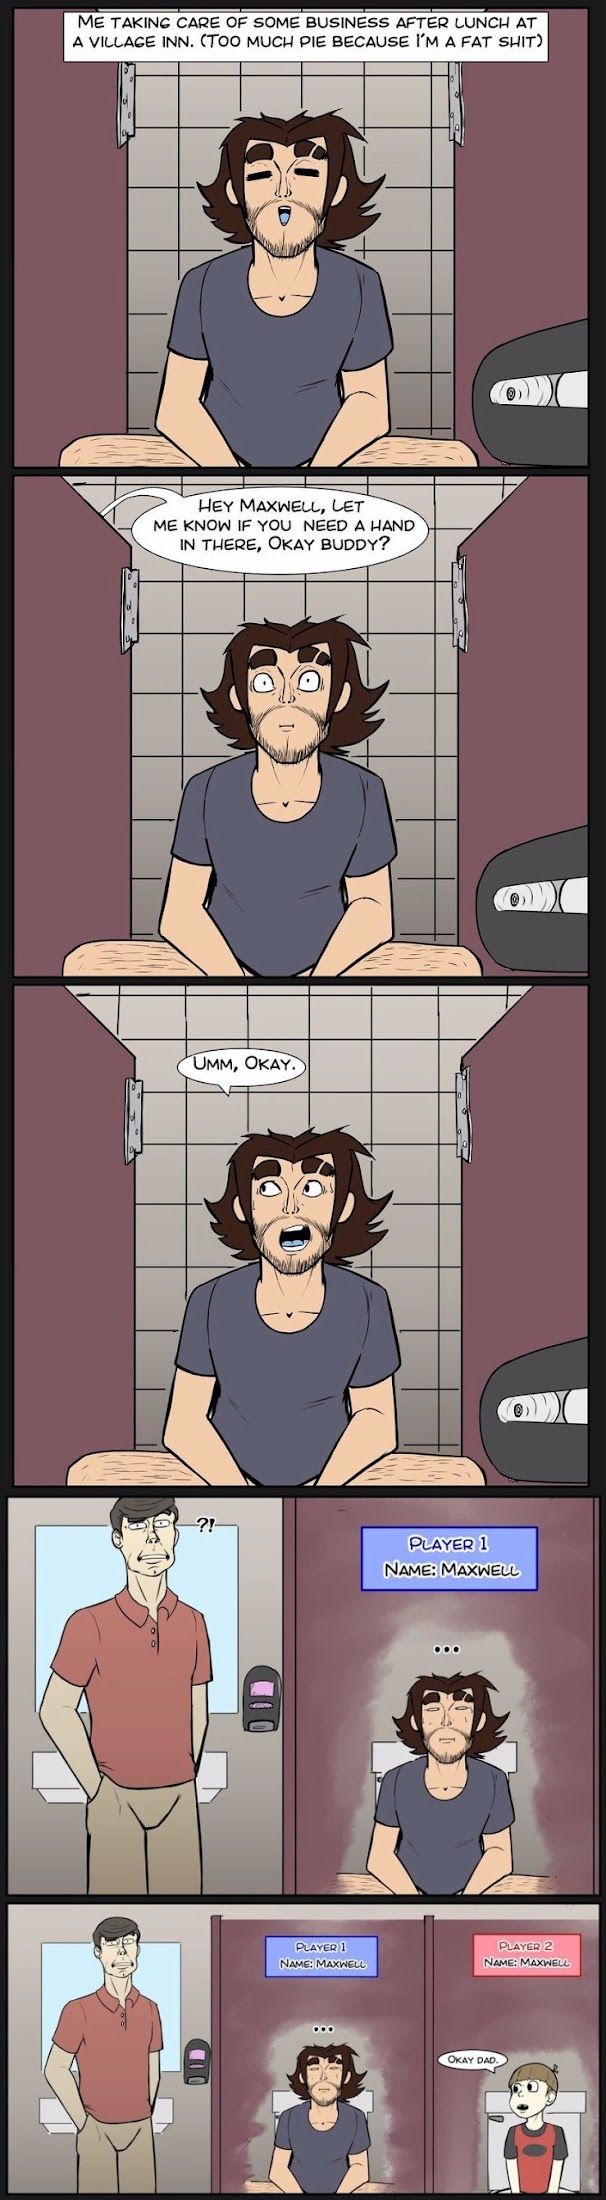 Funny Awkward Toilet Conversation Cartoon Picture